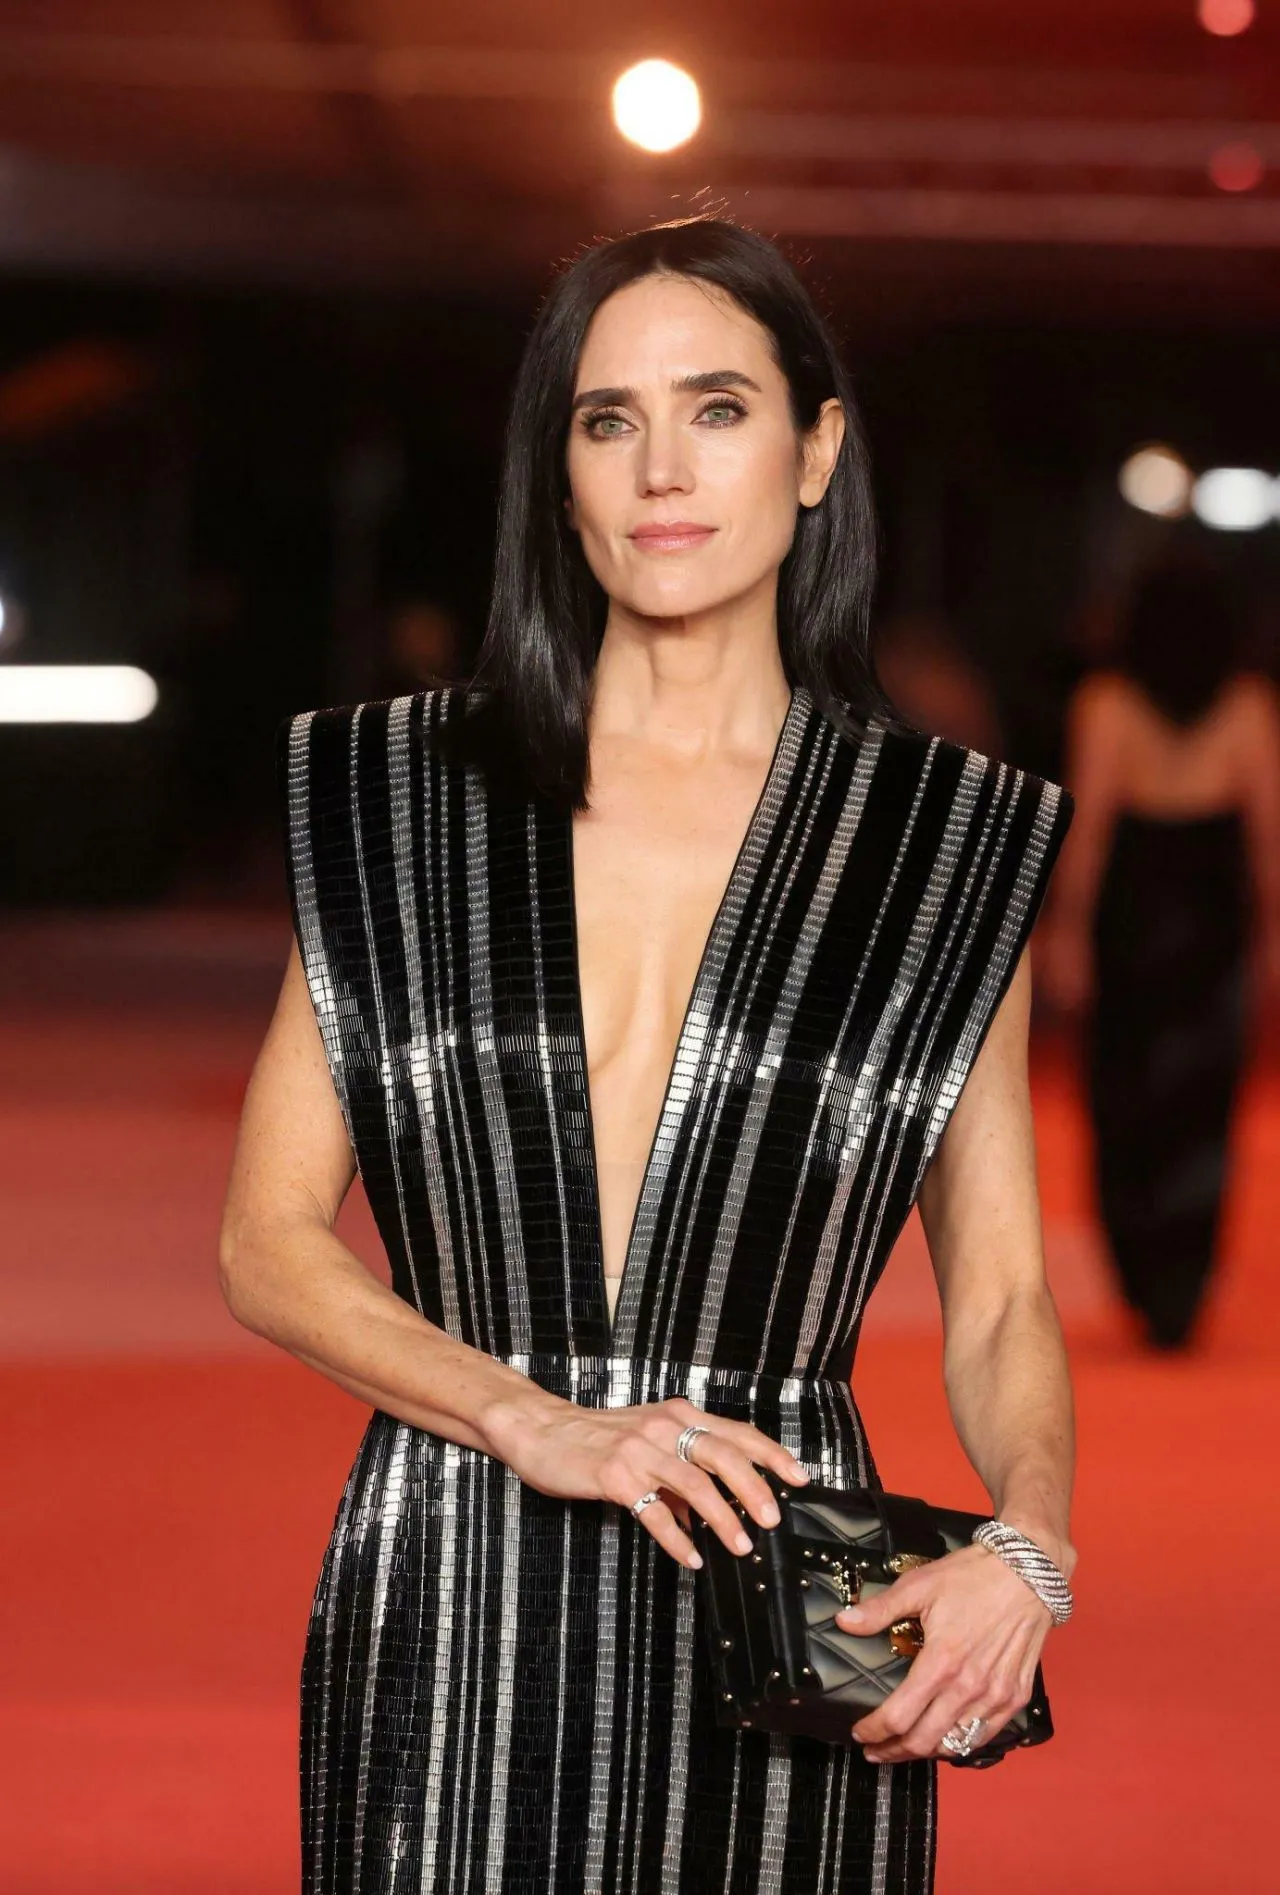 JENNIFER CONNELLY STILLS AT ACADEMY MUSEUM GALA IN LOS ANGELES8